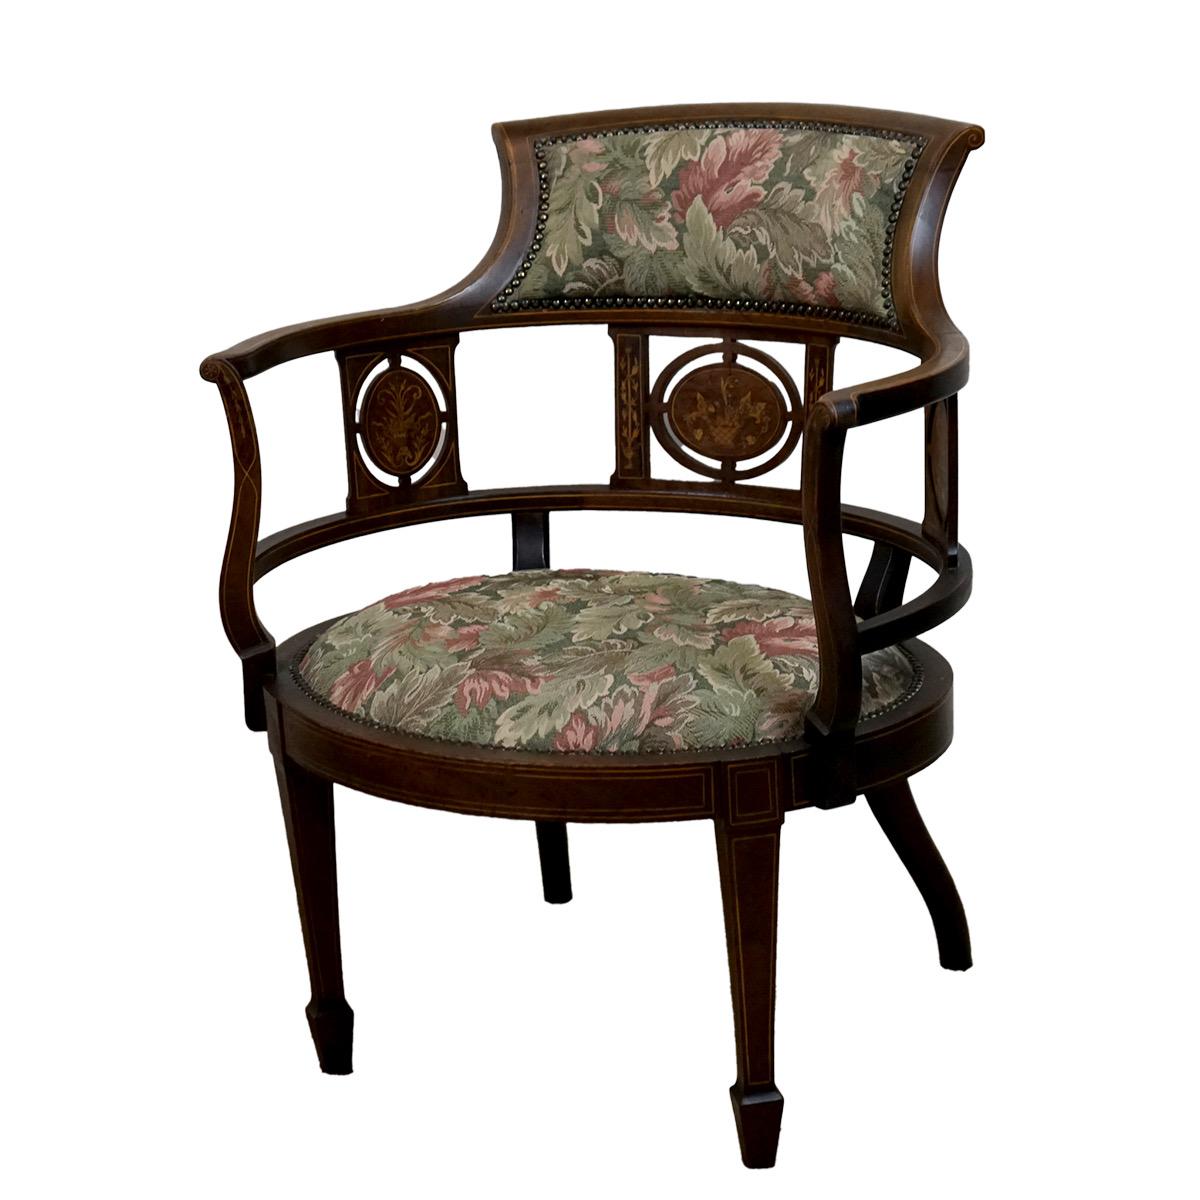 Fine quality and attractive, Edwardian  chair having inlaid upstand to back rail, inlaid supports, fully upholstered seat, standing on turned tapering and inlaid legs. c1900
Don't hesitate to contact me if you have any questions.

Please have a